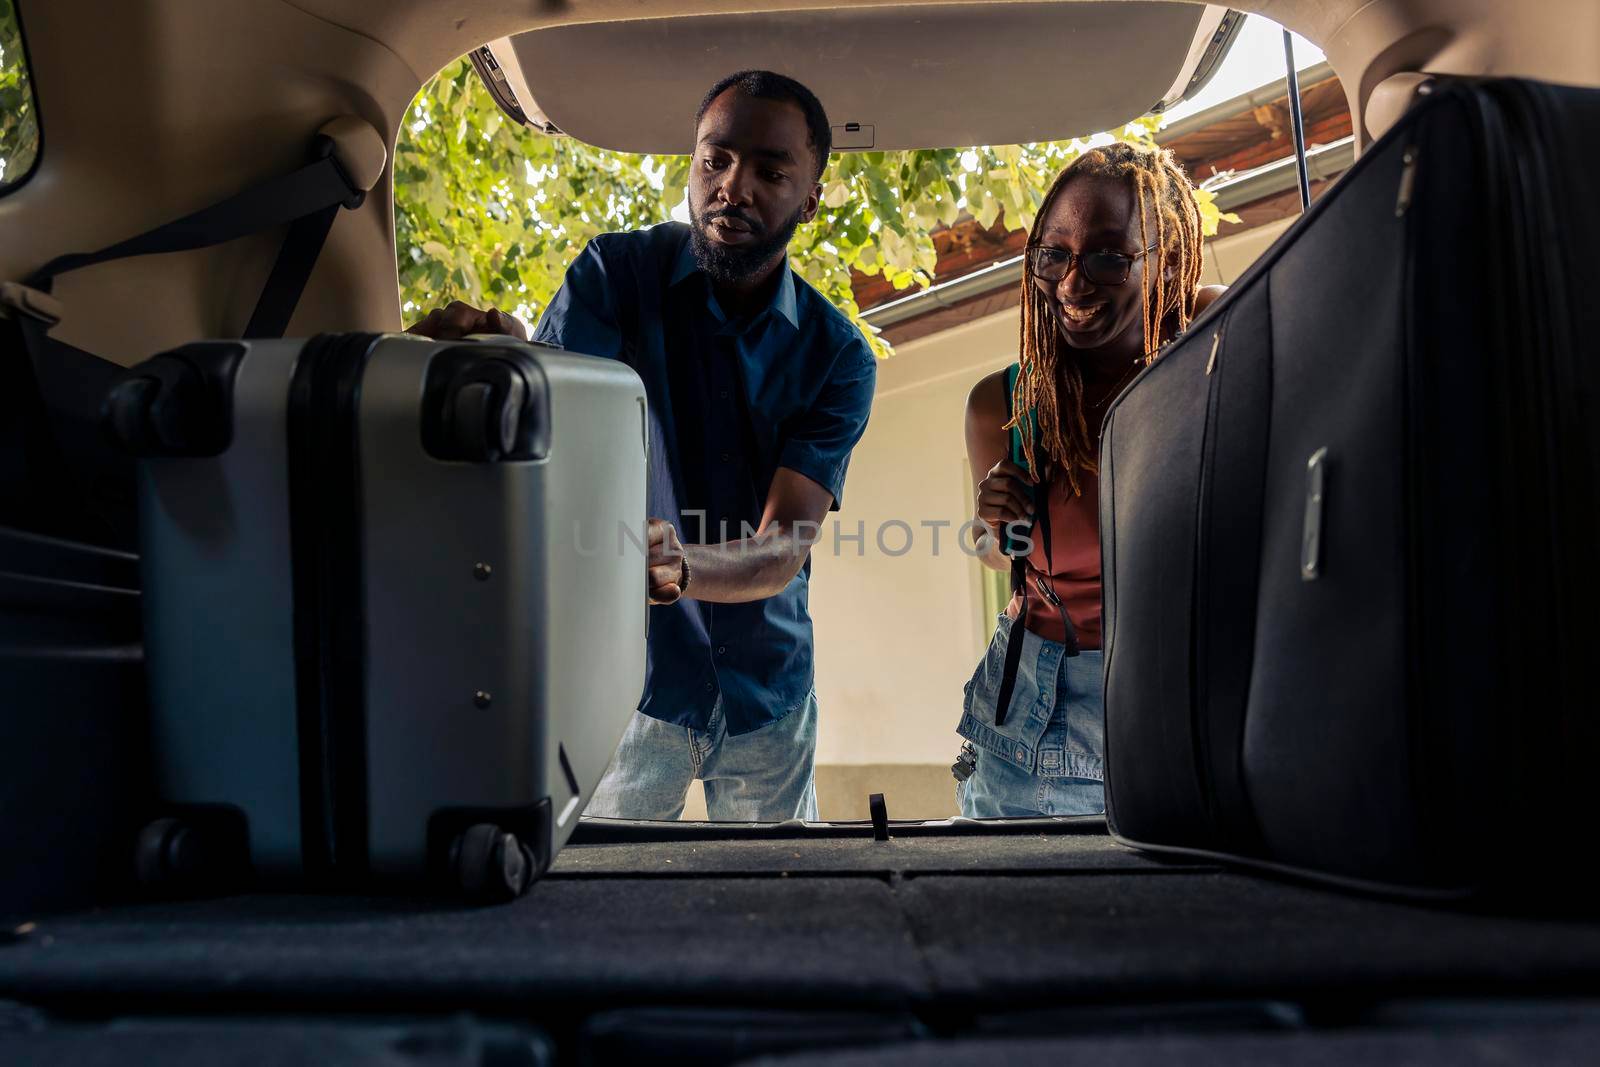 Man and woman loading baggage in vehicle trunk, leaving on summer holiday together. Couple preparing car with travel bags and luggage to go on vacation trip and drive to destination.